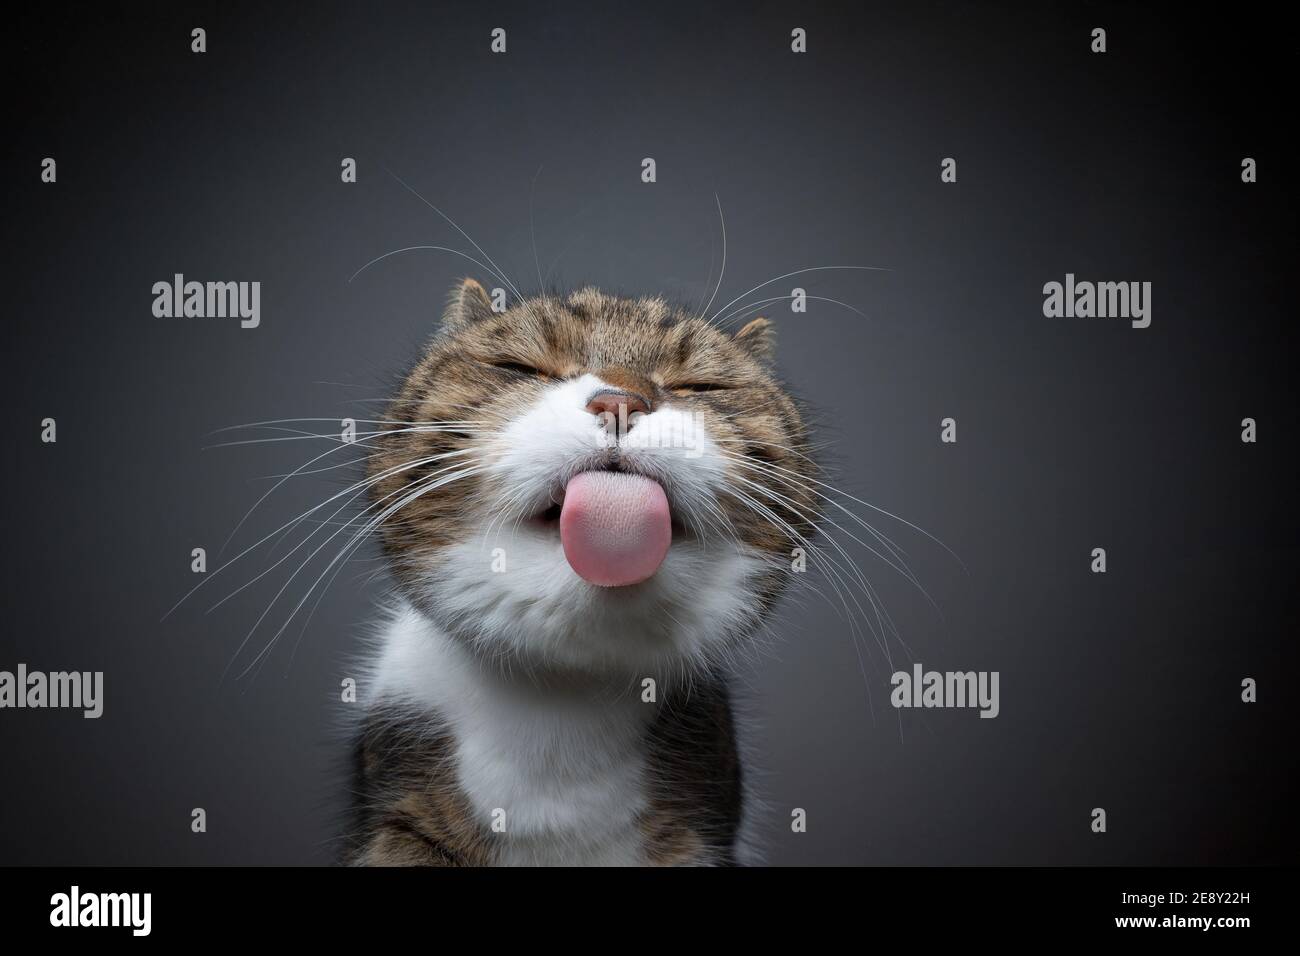 tabby white cat licking glass table sticking out tongue making funny face with copy space Stock Photo